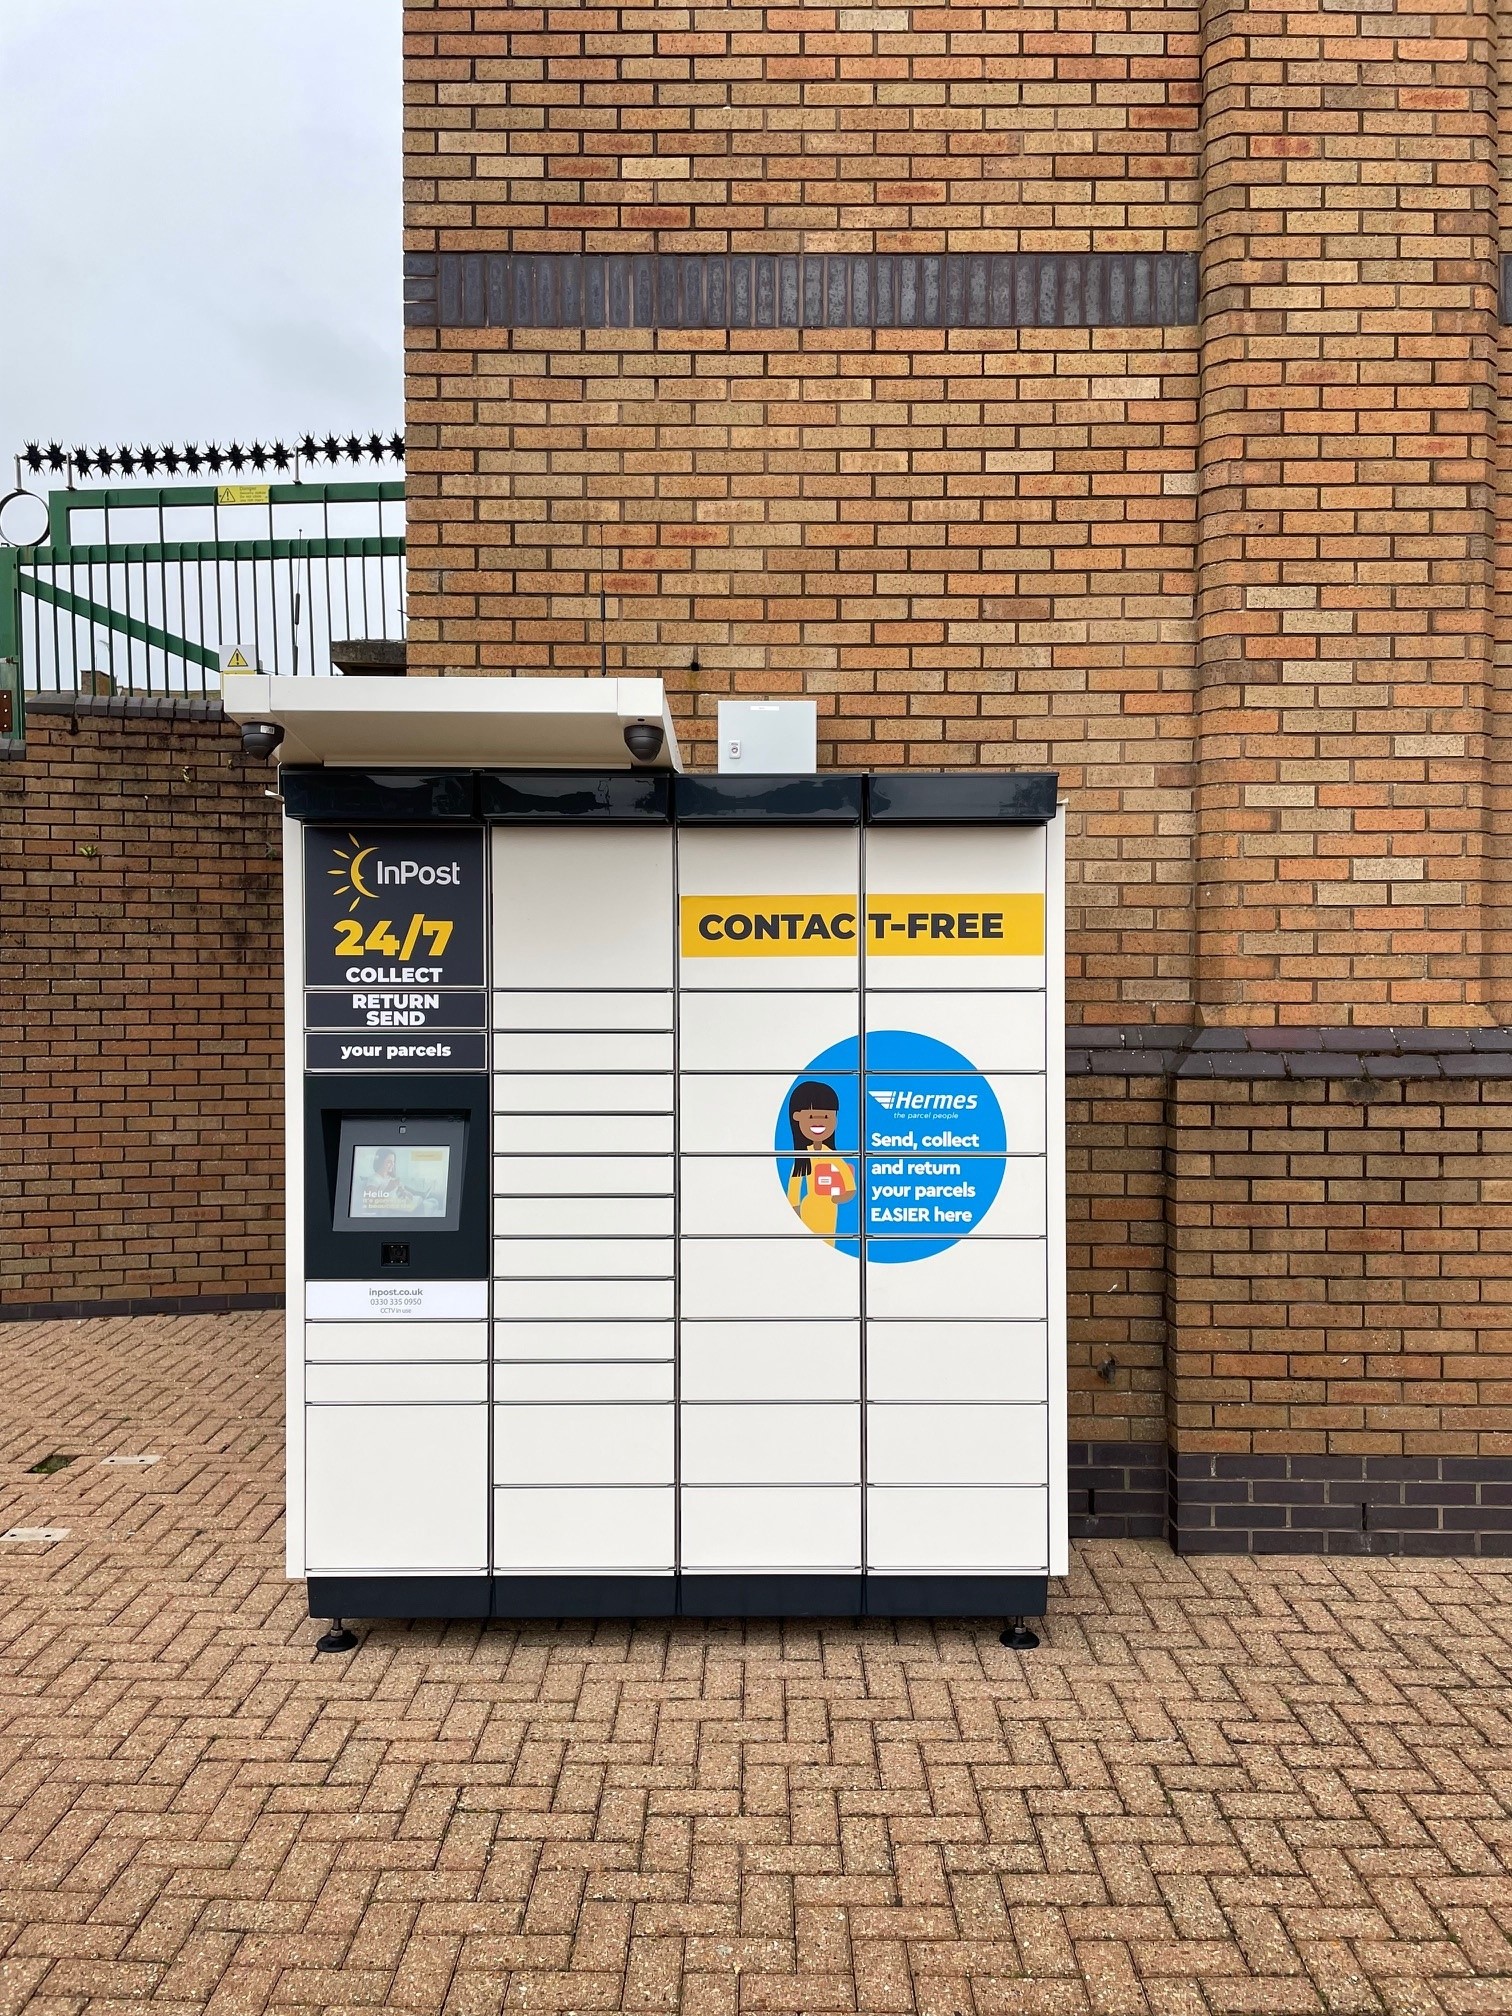 InPost 24/7 Collect, Return, Send your parcel - Sovereign Shopping Centre